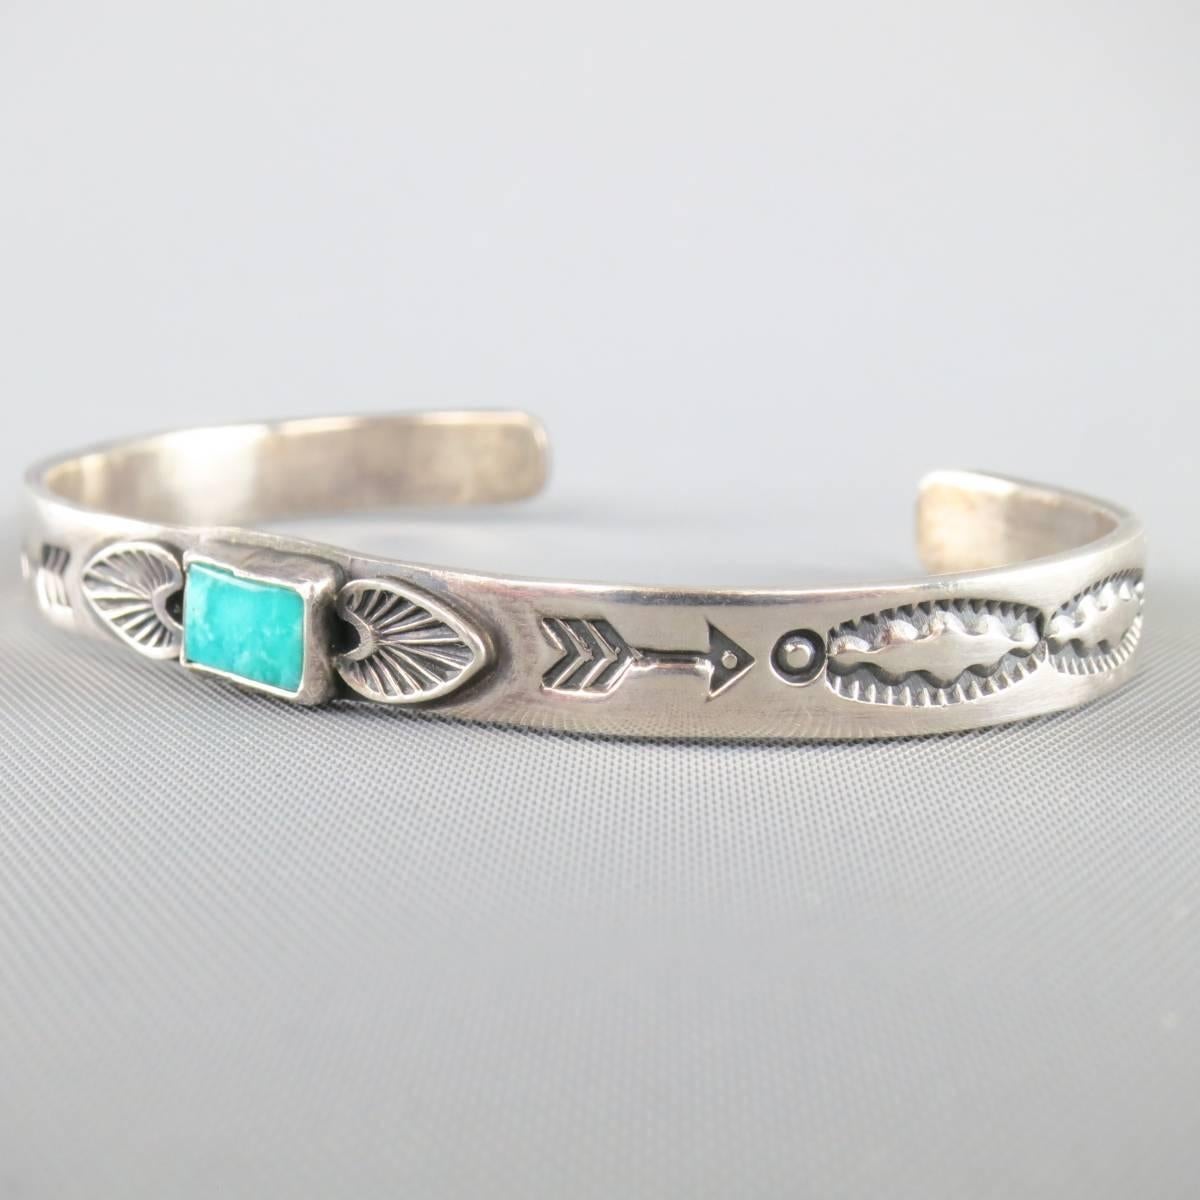 ALBERT JAKE cuff bracelet in sterling silver with Western engravings and Turquoise stone center.
 
Excellent Pre-Owned Condition.
 
Fits: 16.5 cm.
Width: 0.5 cm.


Web ID: 81992 